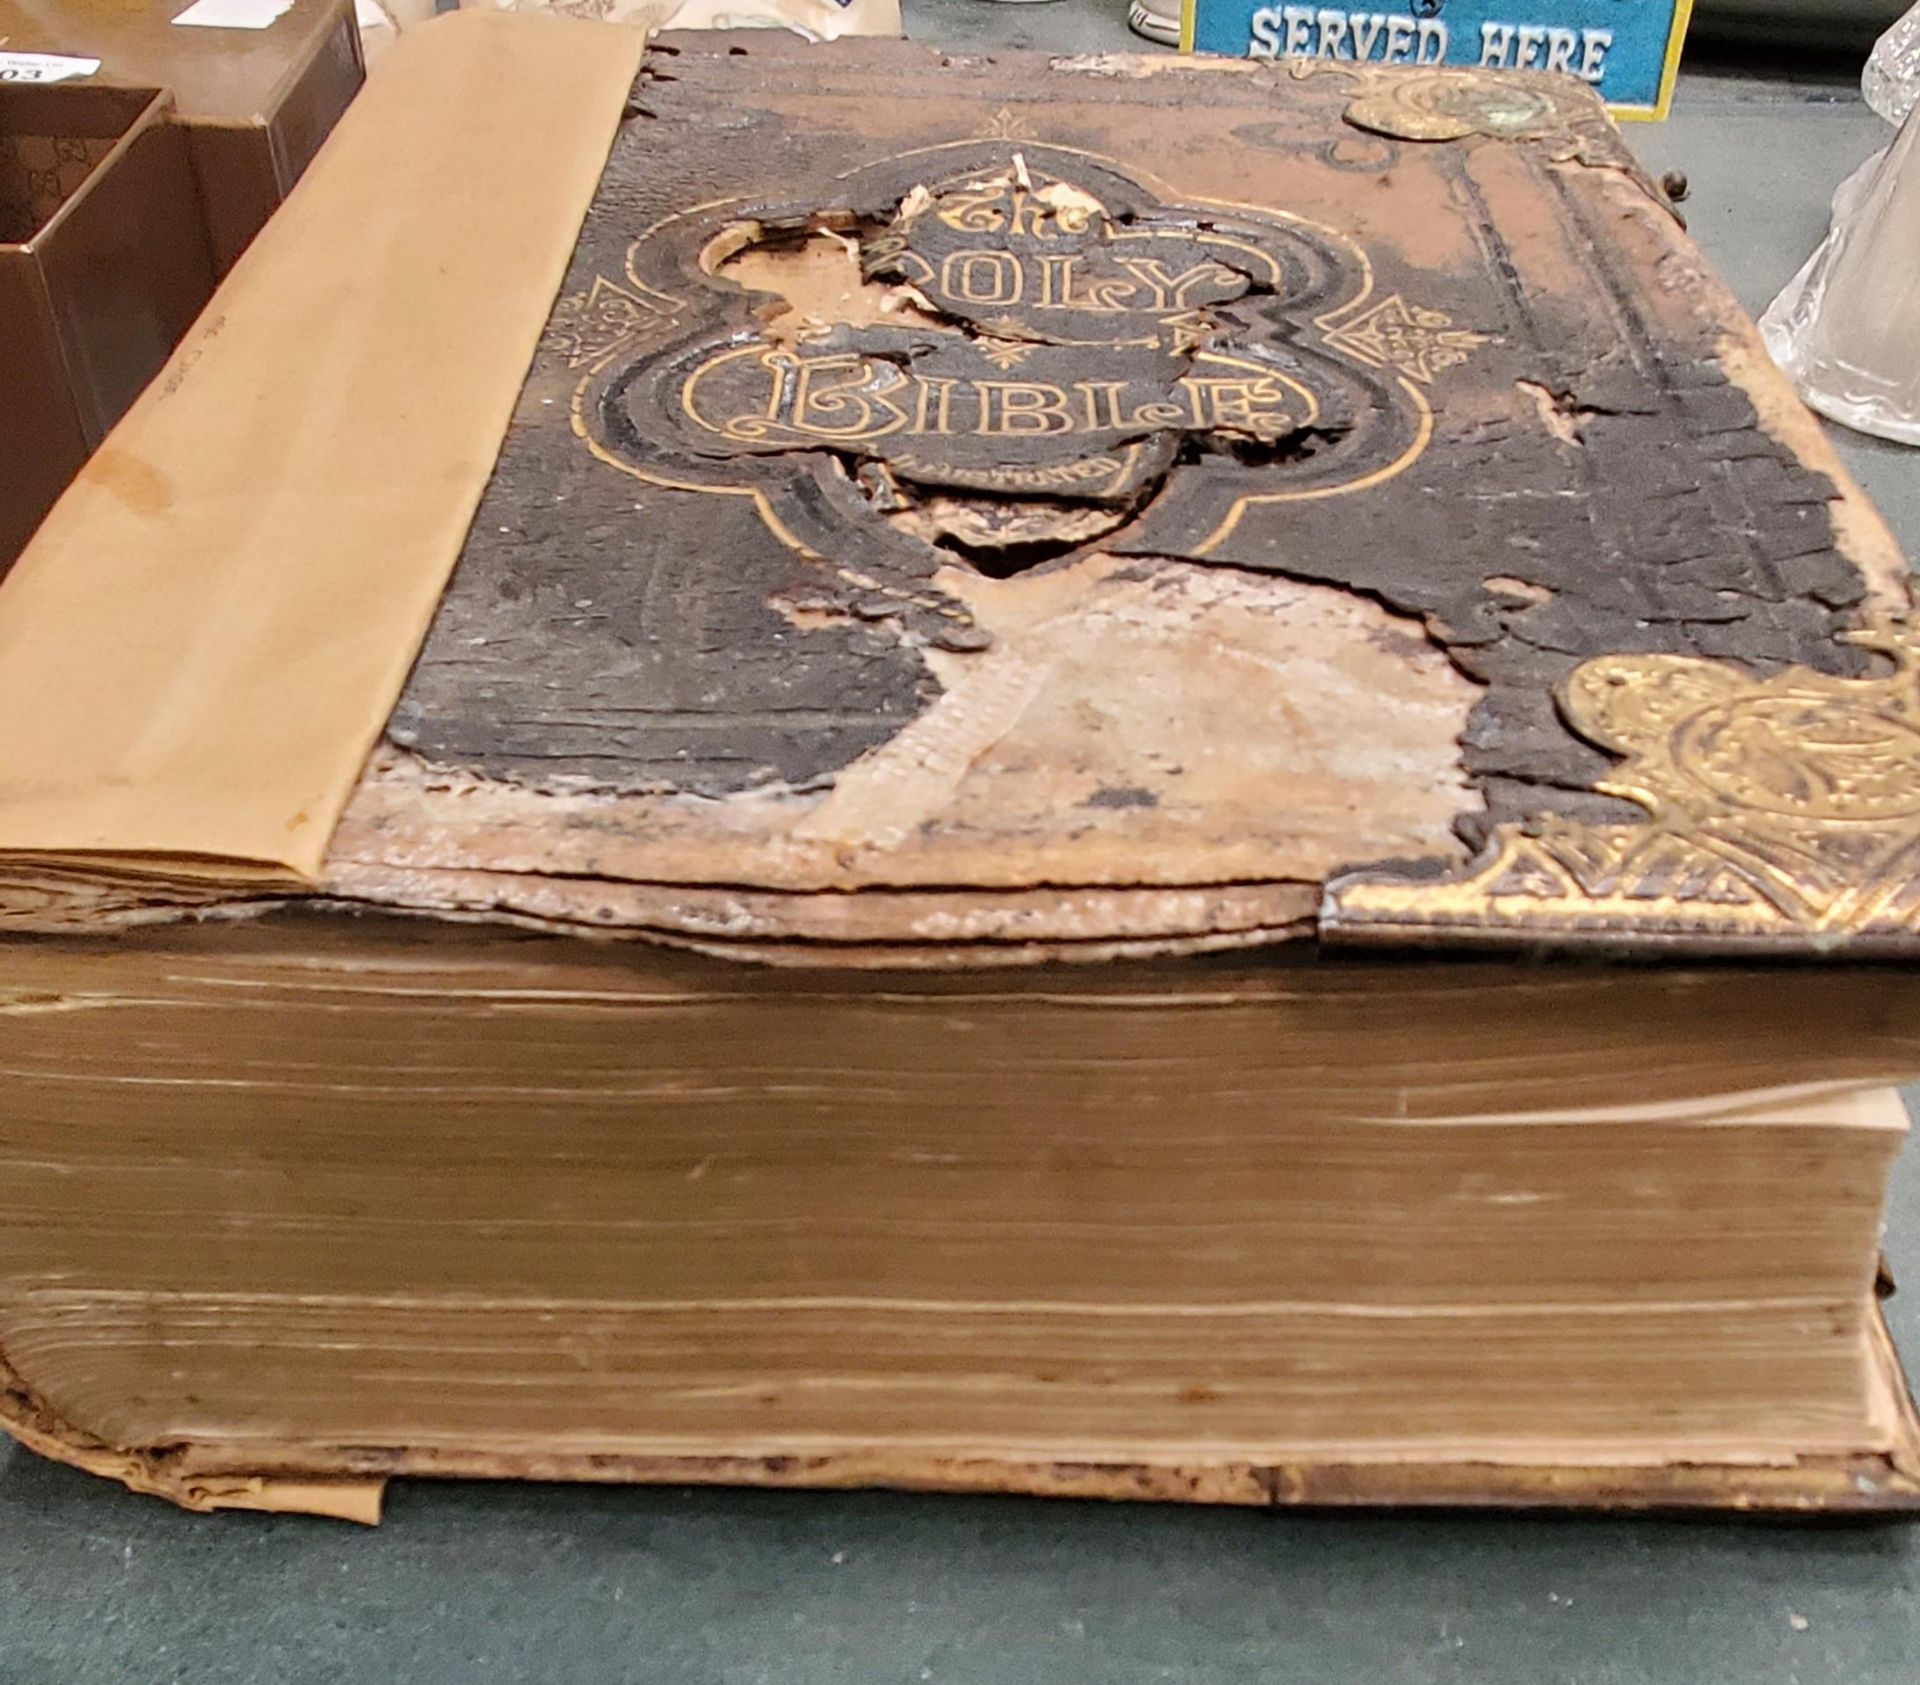 A LARGE ANTIQUARIAN HOLY BIBLE WITH COLOUR AND BLACK AND WHITE PLATES, SOME DAMAGE TO THE COVER - Image 2 of 3